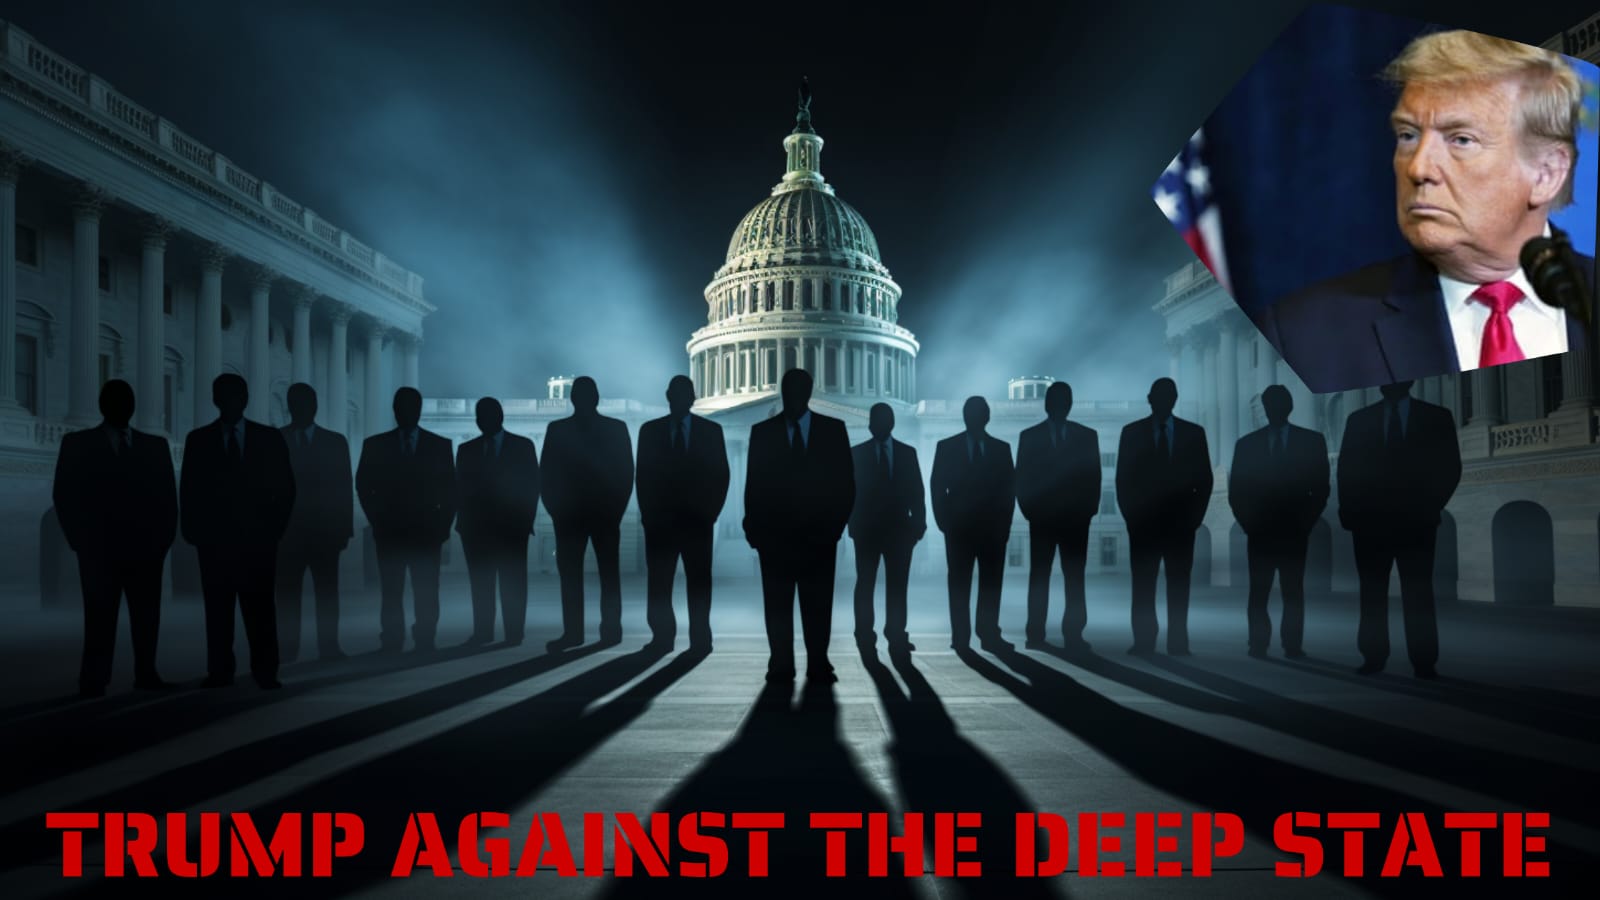 EXPOSED: This Is How The Deep State and The Military Industrial Complex Pulled All Their Black Operation Behind the Black Curtain